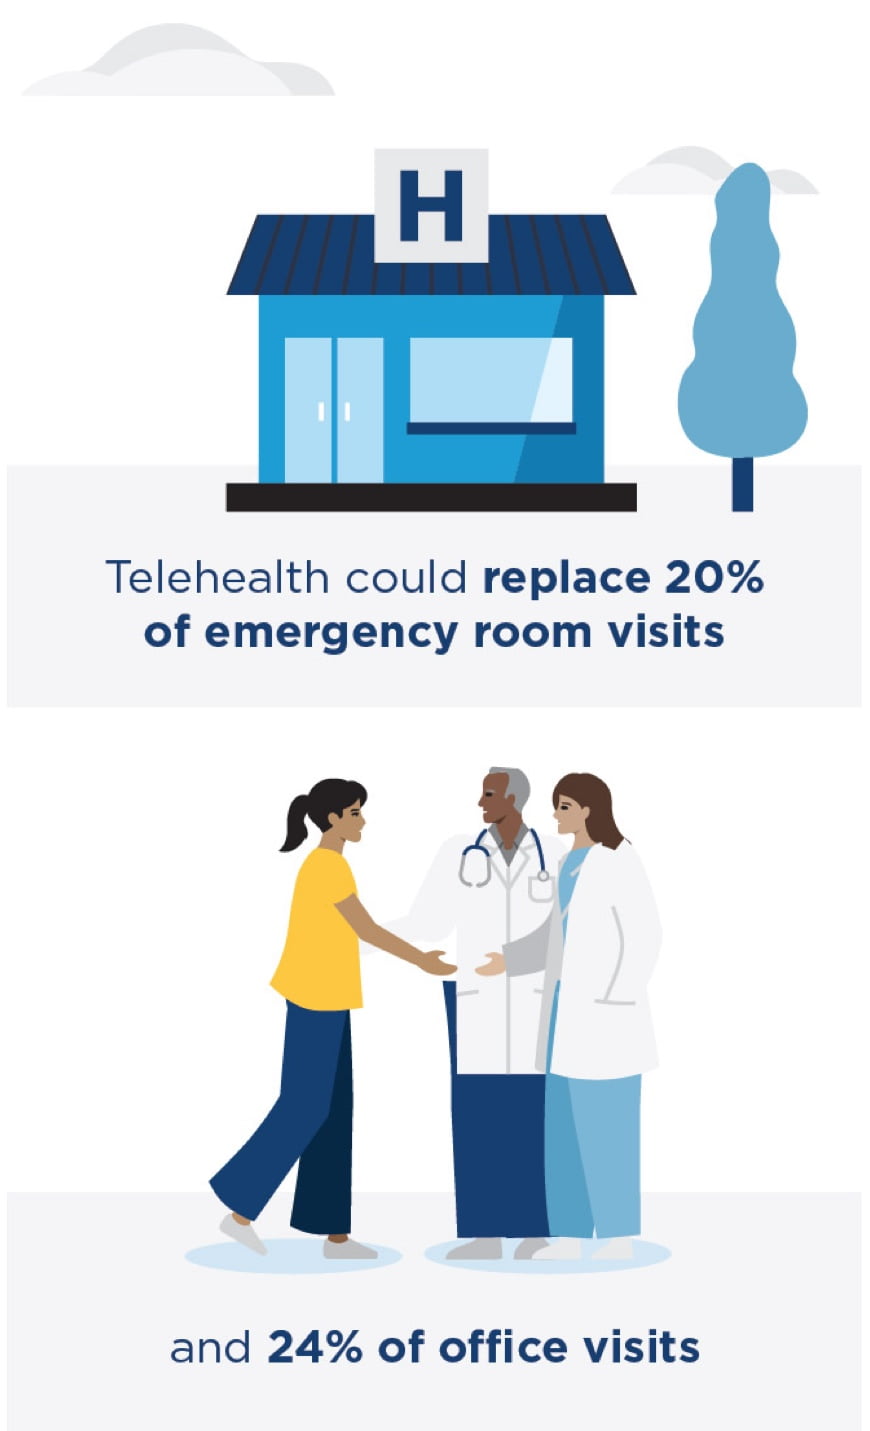 Illustrations of a hospital and of a patient with two doctors, with captions: telehealth could replace 20% of emergency room visits and 24% of office visits